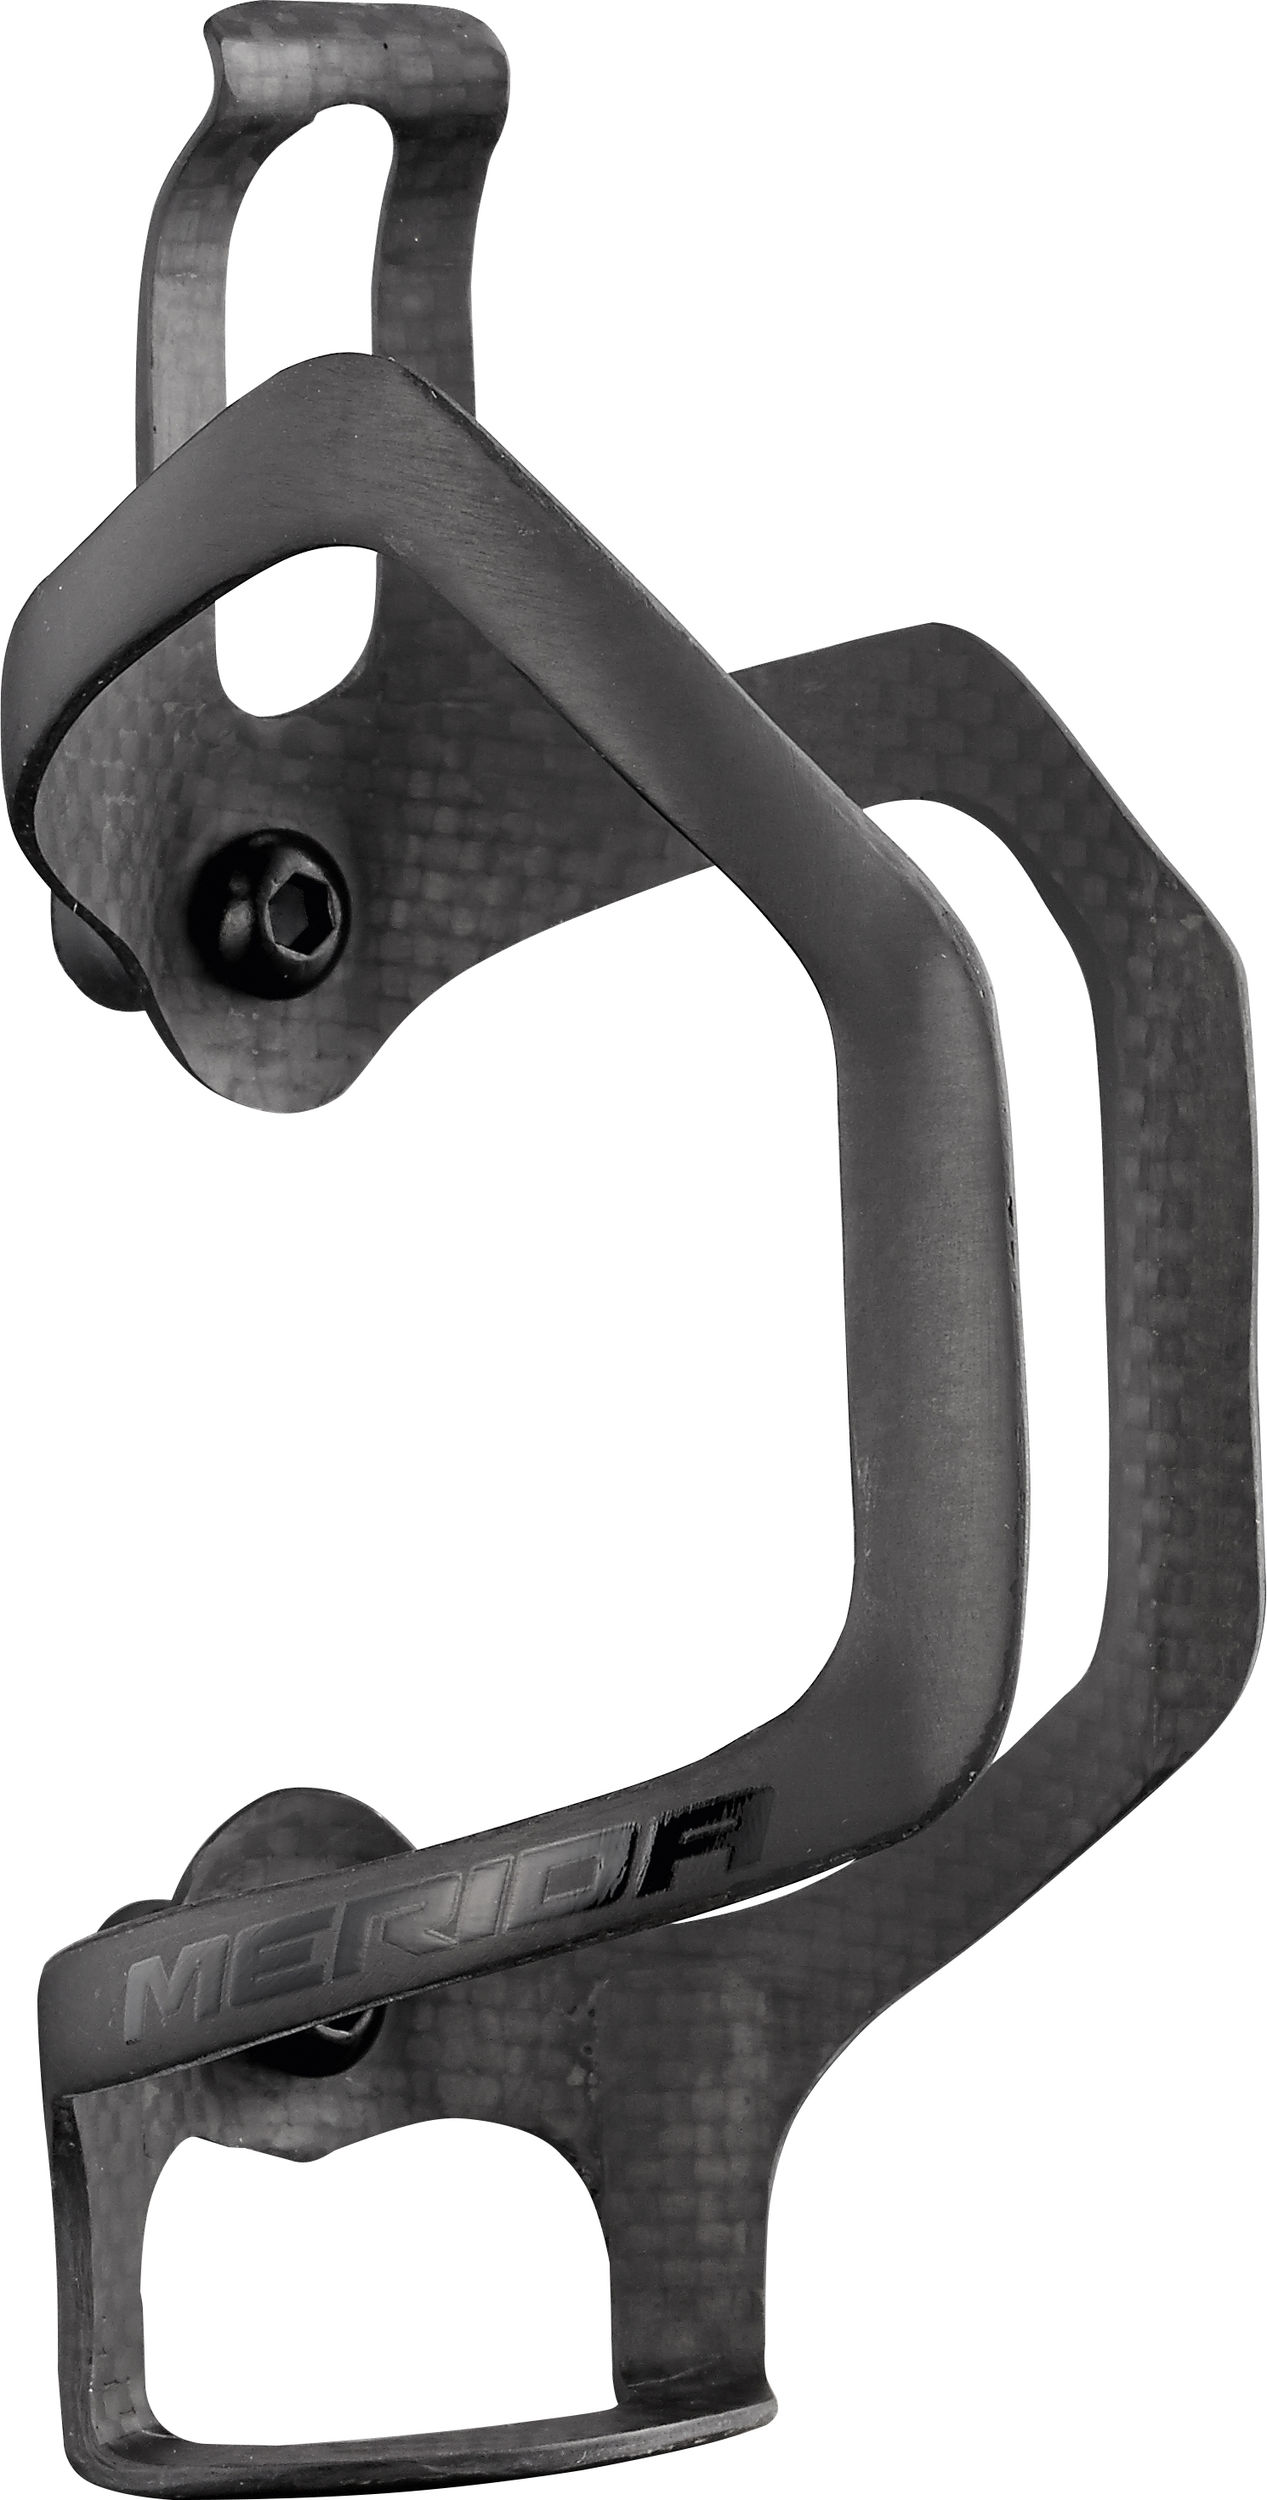 side load clamp seatpost